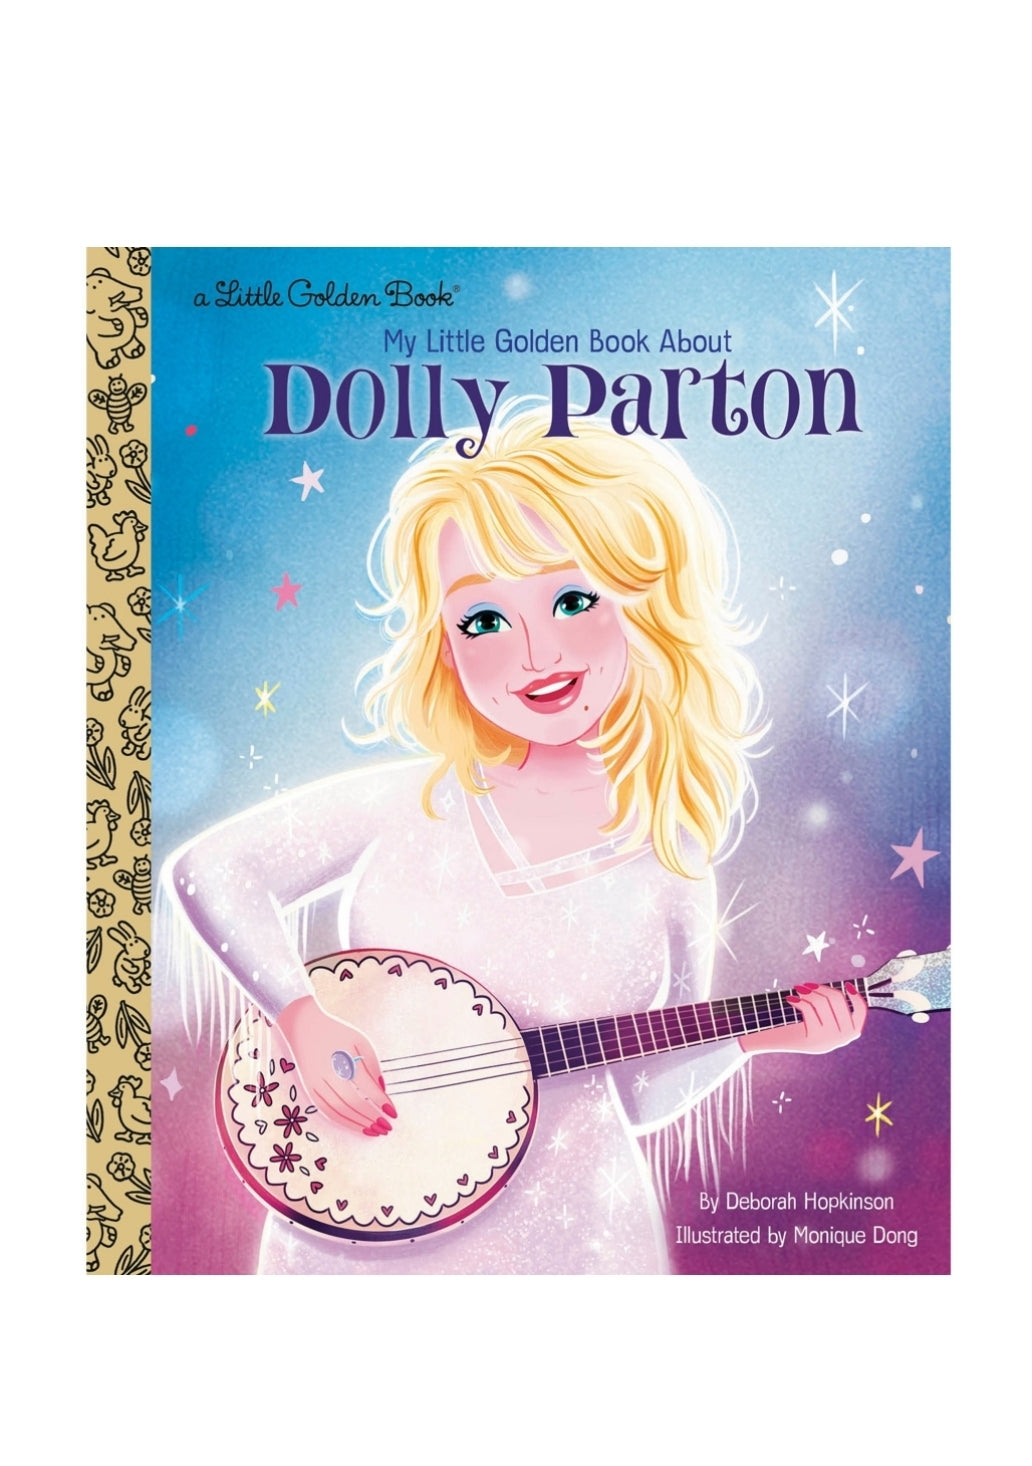 My Little Golden Book About Dolly Parton